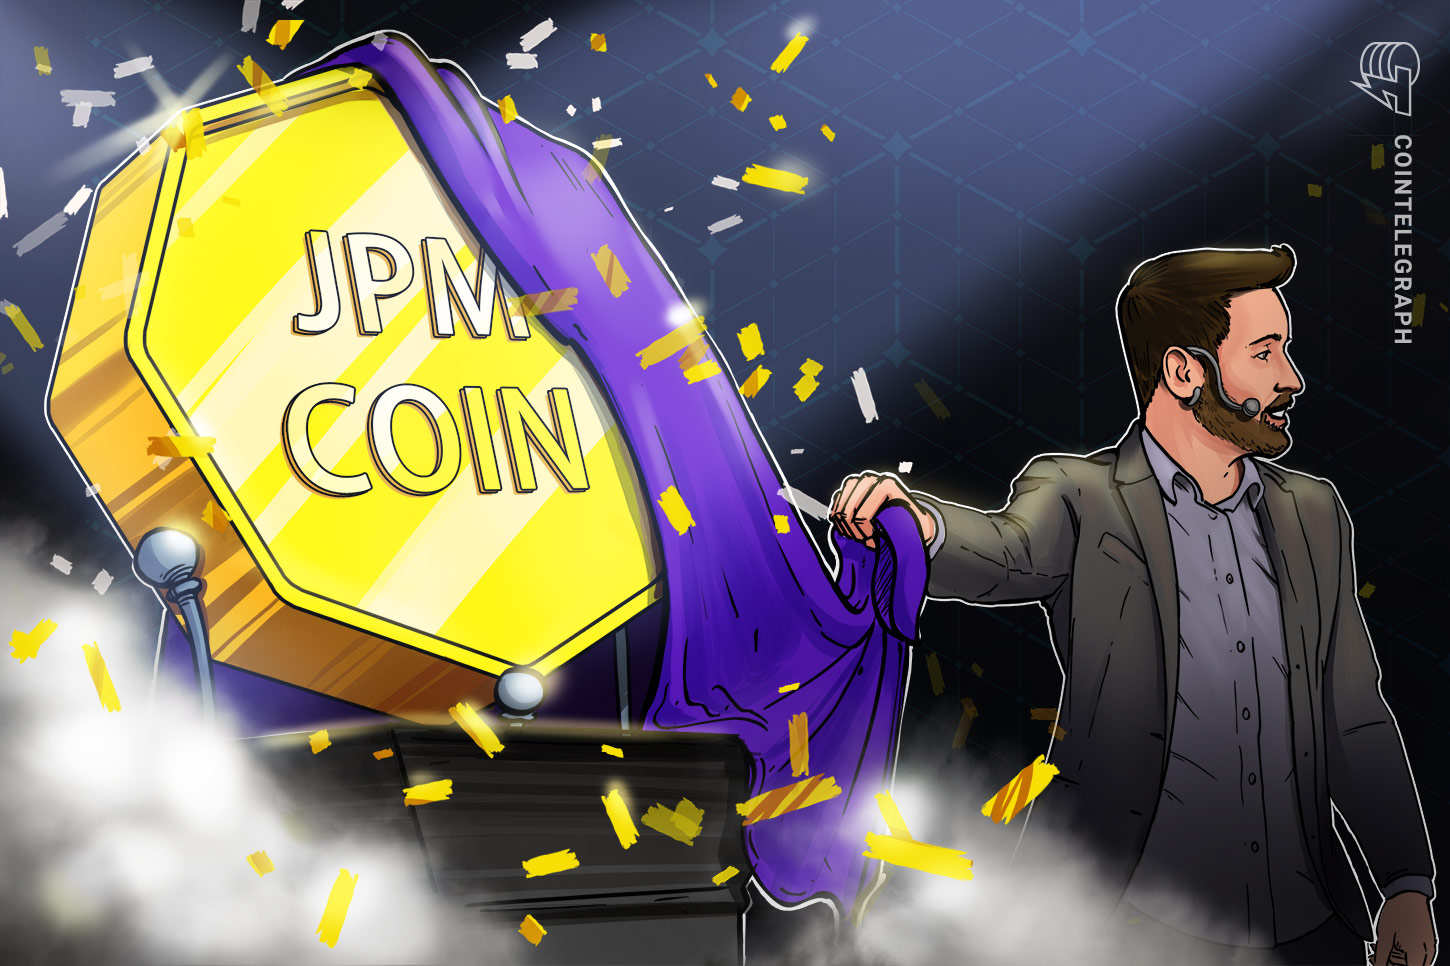 JPM Coin debut marks begin of blockchain’s value-driven adoption cycle